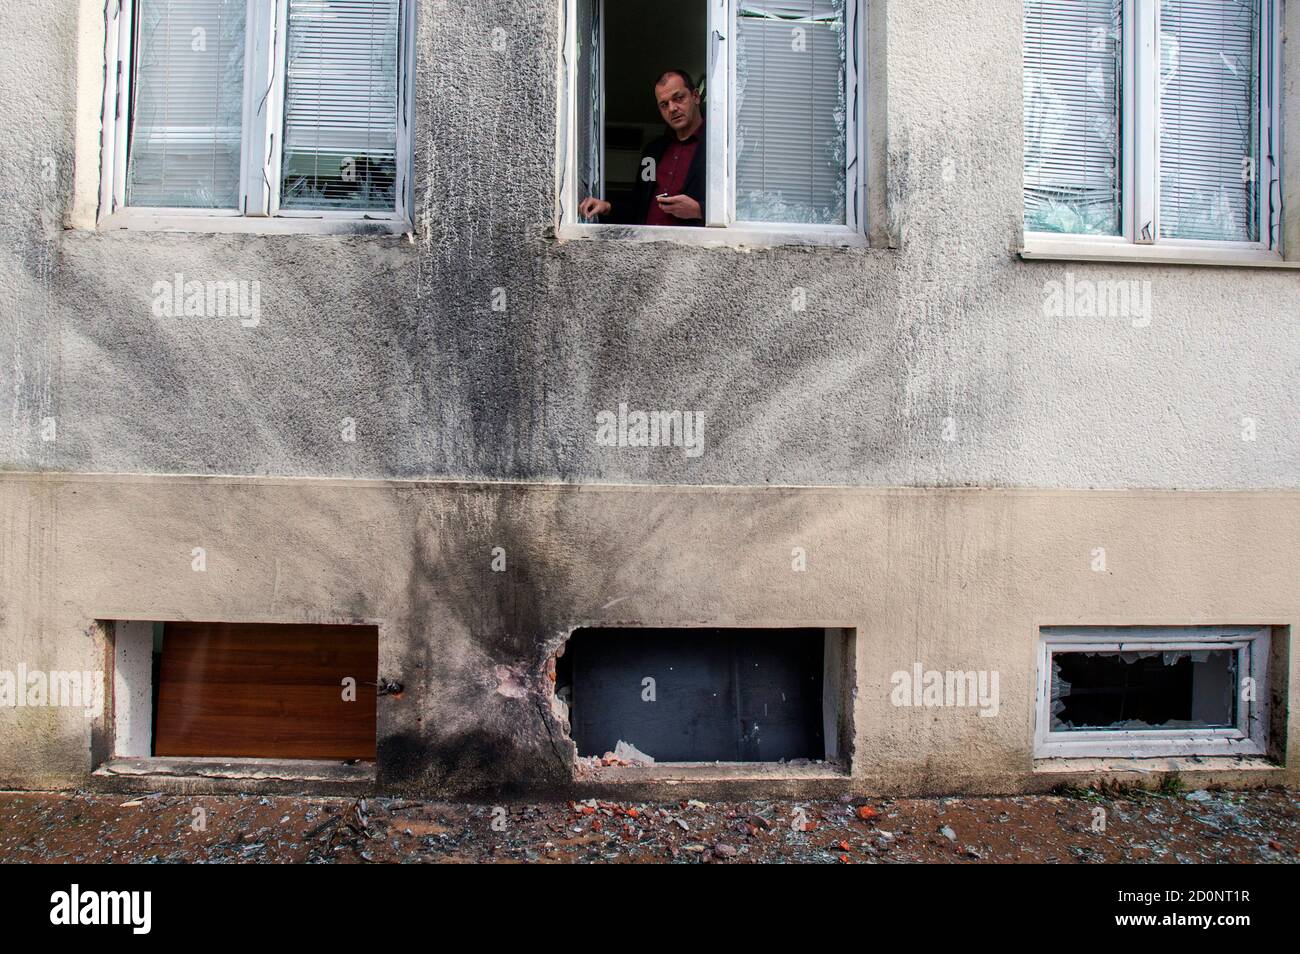 Editor-in-chief of Montenegro's leading daily Vijesti, Mihailo Jovovic  looks through a window damaged in a bomb blast overnight at the newspaper's  offices in Podgorica December 27, 2013. This is the latest attack